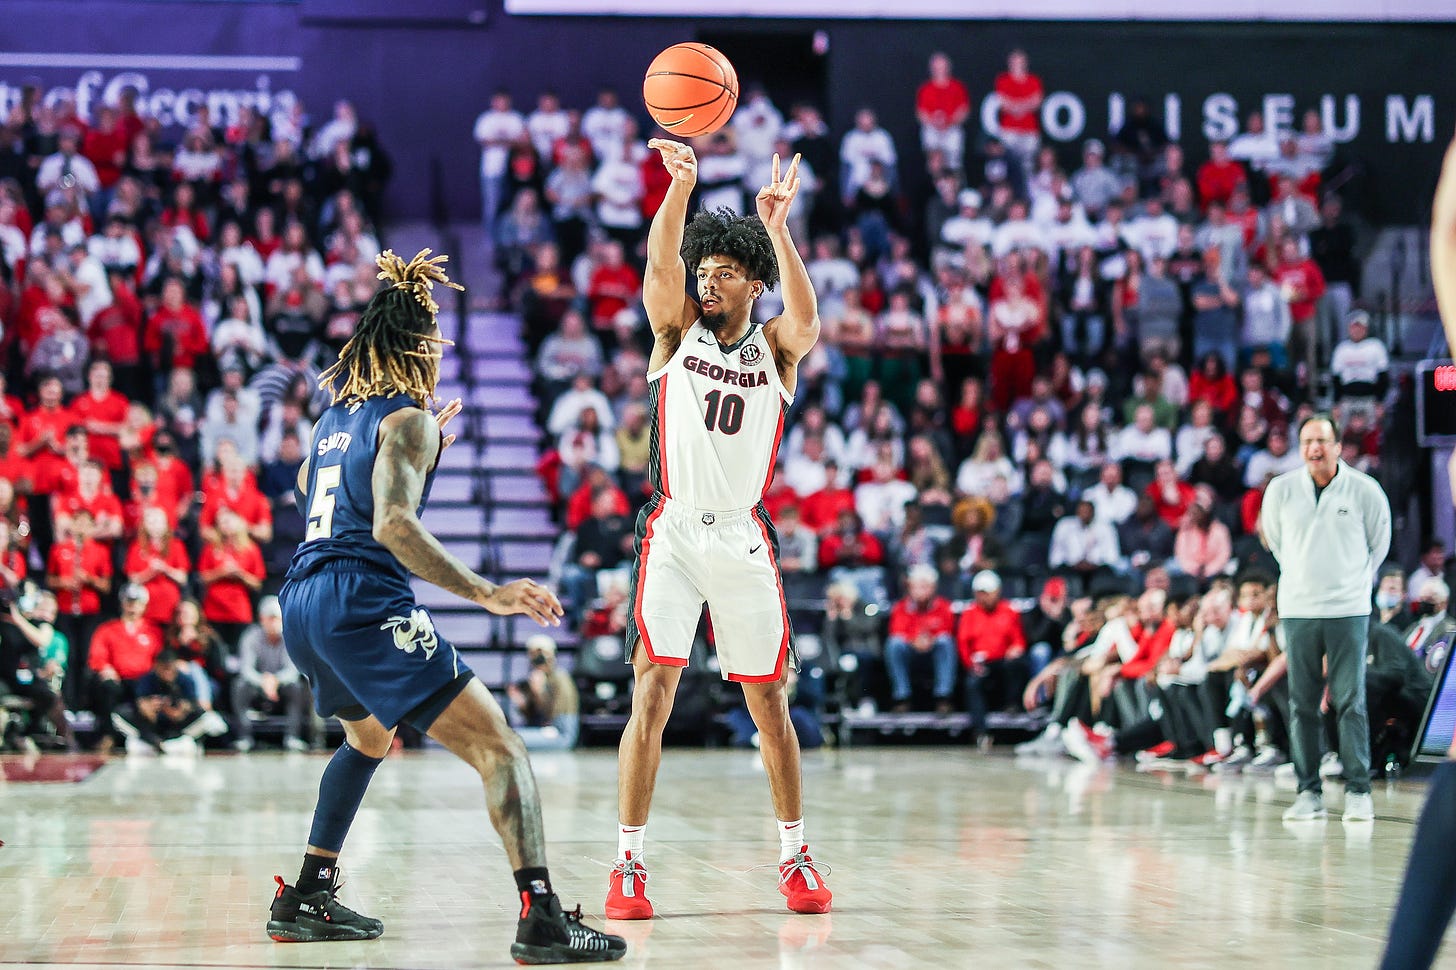 Georgia basketball player Aaron Cook (10) during a game against Georgia Tech in Stegeman Coliseum in Athens, Ga., on Friday, Nov. 19, 2021. (Photo by Mackenzie Miles)